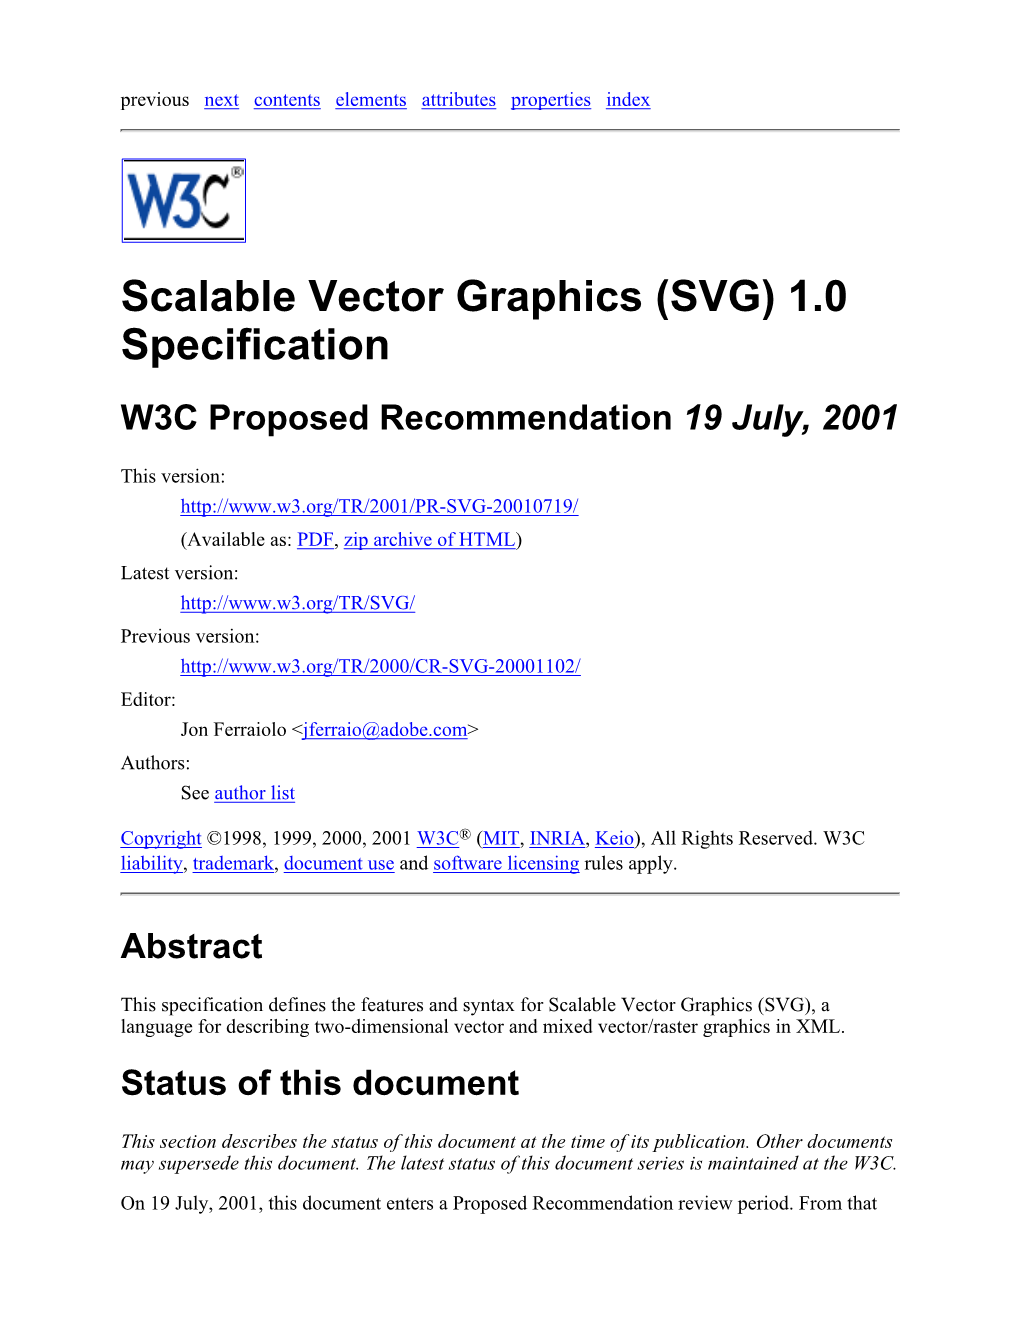 SVG) 1.0 Specification W3C Proposed Recommendation 19 July, 2001